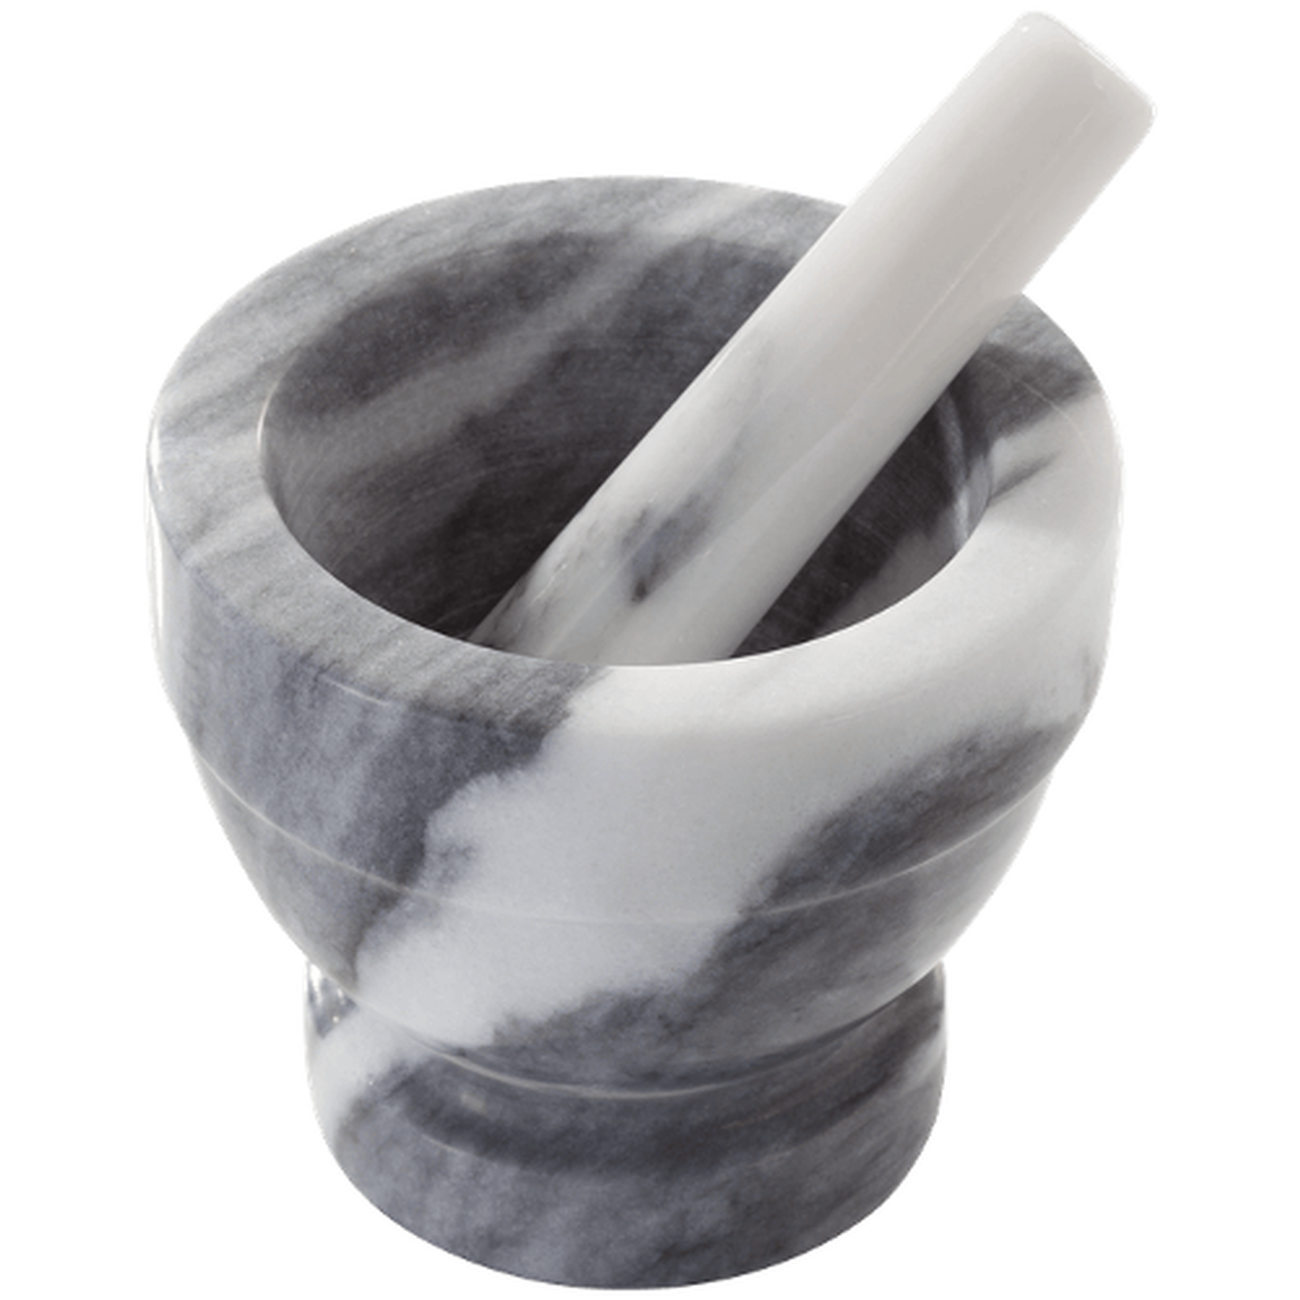 judge-marble-mortar-and-pestle - Judge Marble Mortar & Pestle